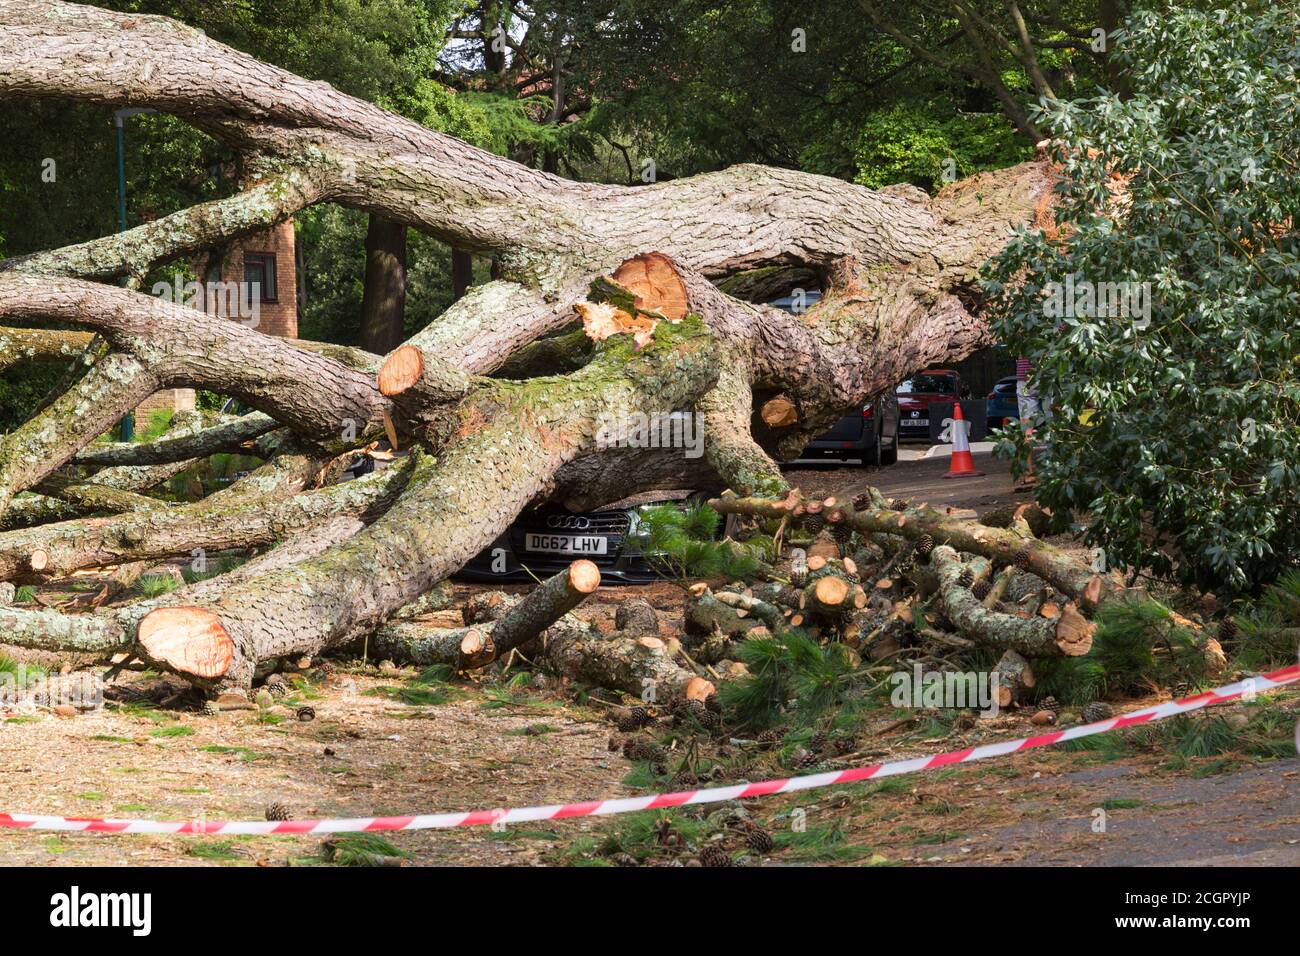 Bournemouth, Dorset UK. 12th September 2020. A large tree fell crushing several cars yesterday evening in Chine Crescent Road, Bournemouth. Fortunately no one was reported hurt during the fall, but unconfirmed reports today from one of the nearby residents that a tree recovery person was taken to hospital after a helicopter landed nearby - details not able to be verified. The road remains closed today. Update - ITV report that a tree surgeon was seriously injured while clearing the debris and airlifted to Southampton Hospital. Credit: Carolyn Jenkins/Alamy Live News Stock Photo